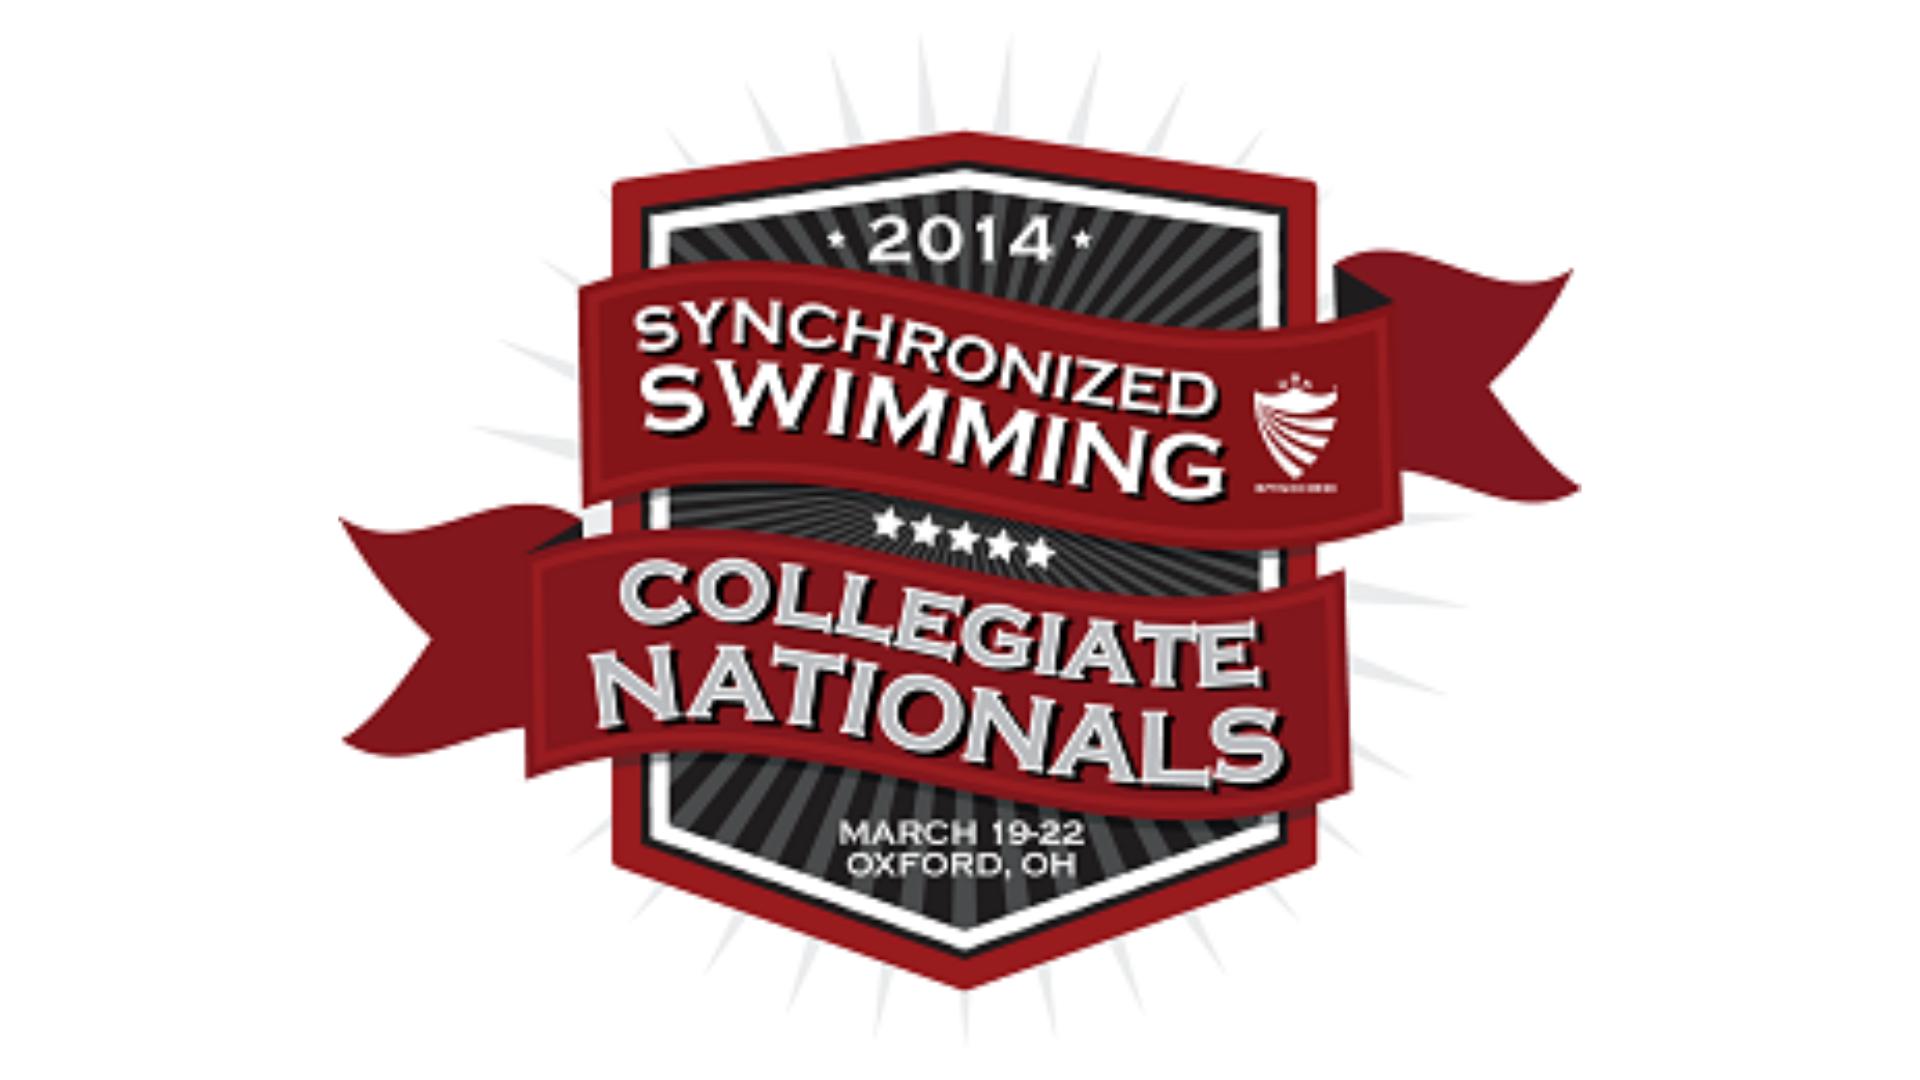 2014 Synchronized Swimming Collegiate Nationals — TAKEITLIVE